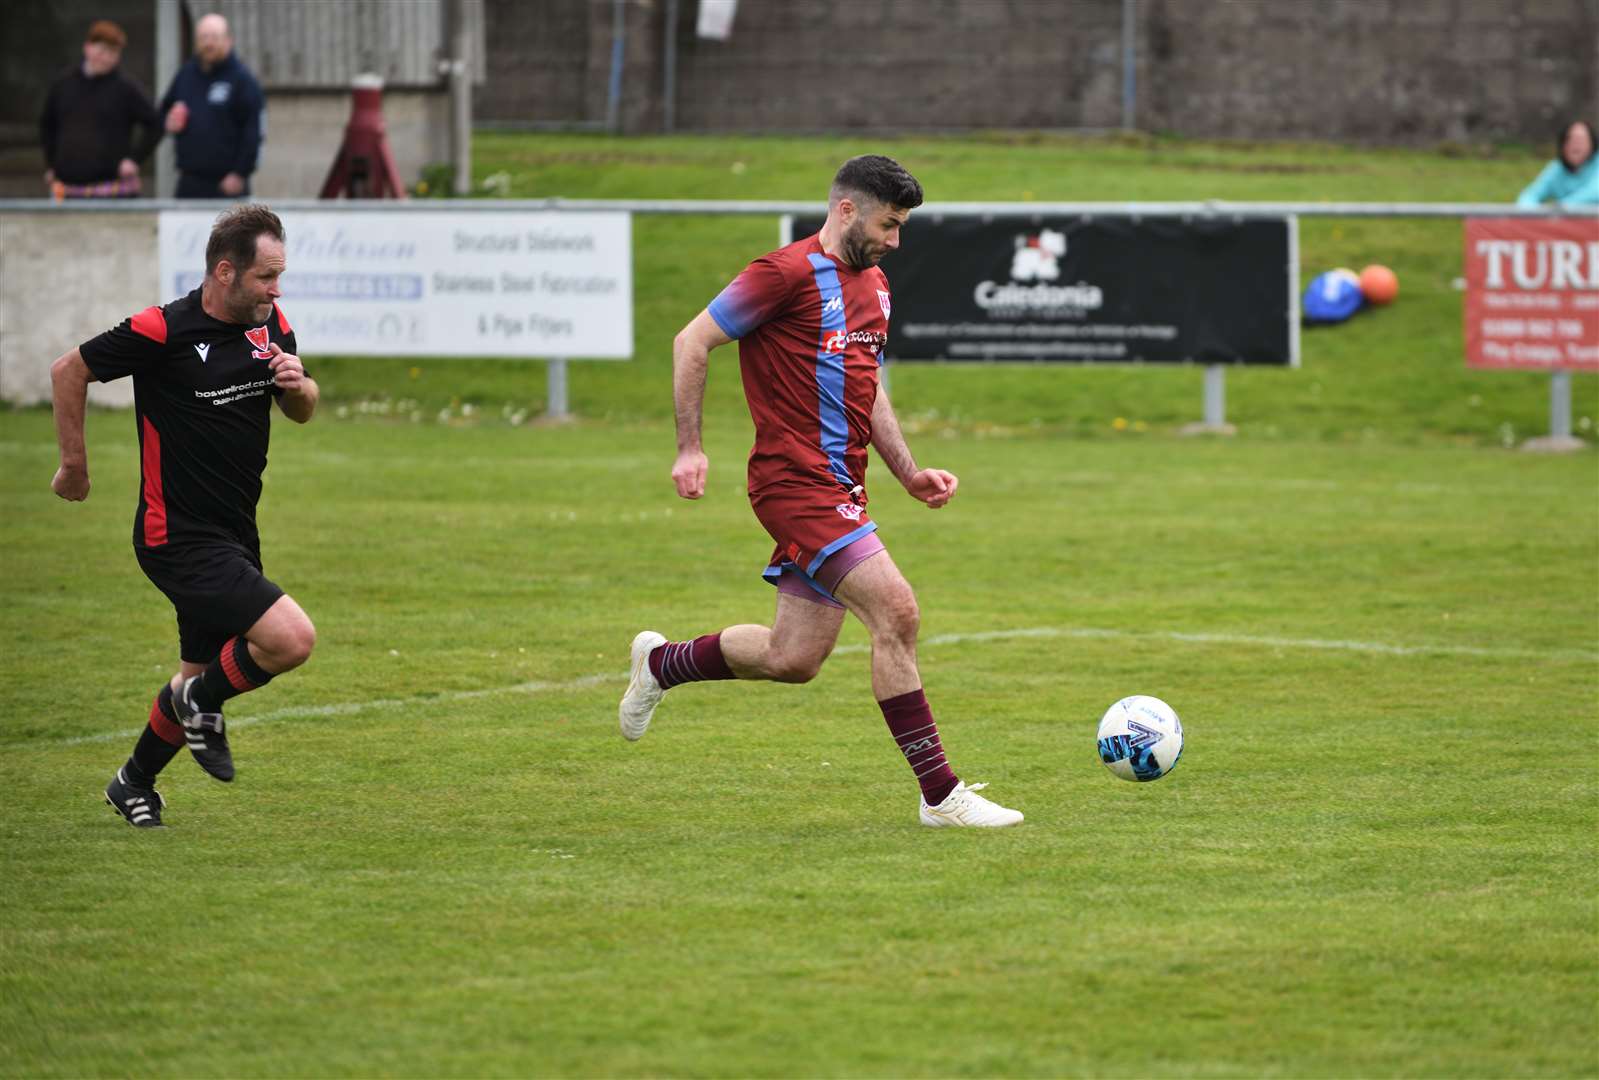 Cammy Keith returned to Kynoch Park on Saturday. Picture: Moraylight